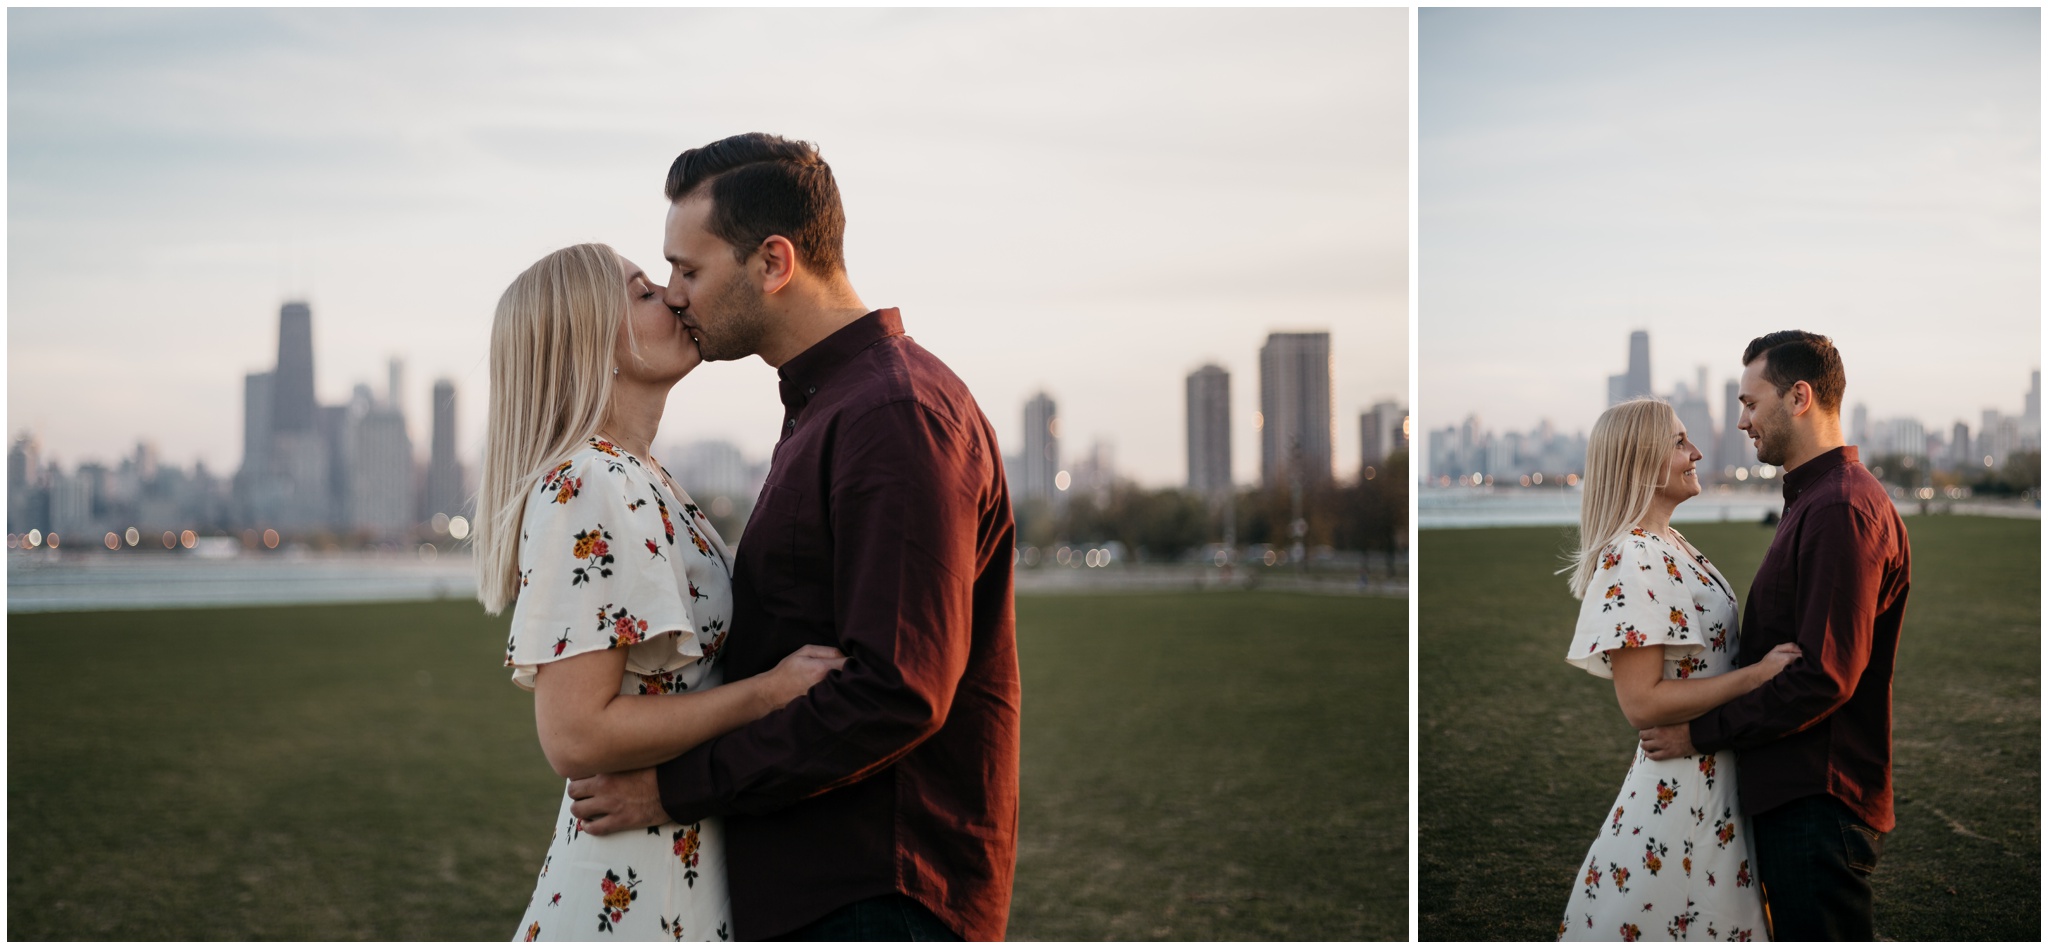 The Morros Wedding Photography Melissa and Anil Downtown Chicago Engagement Session_0459.jpg